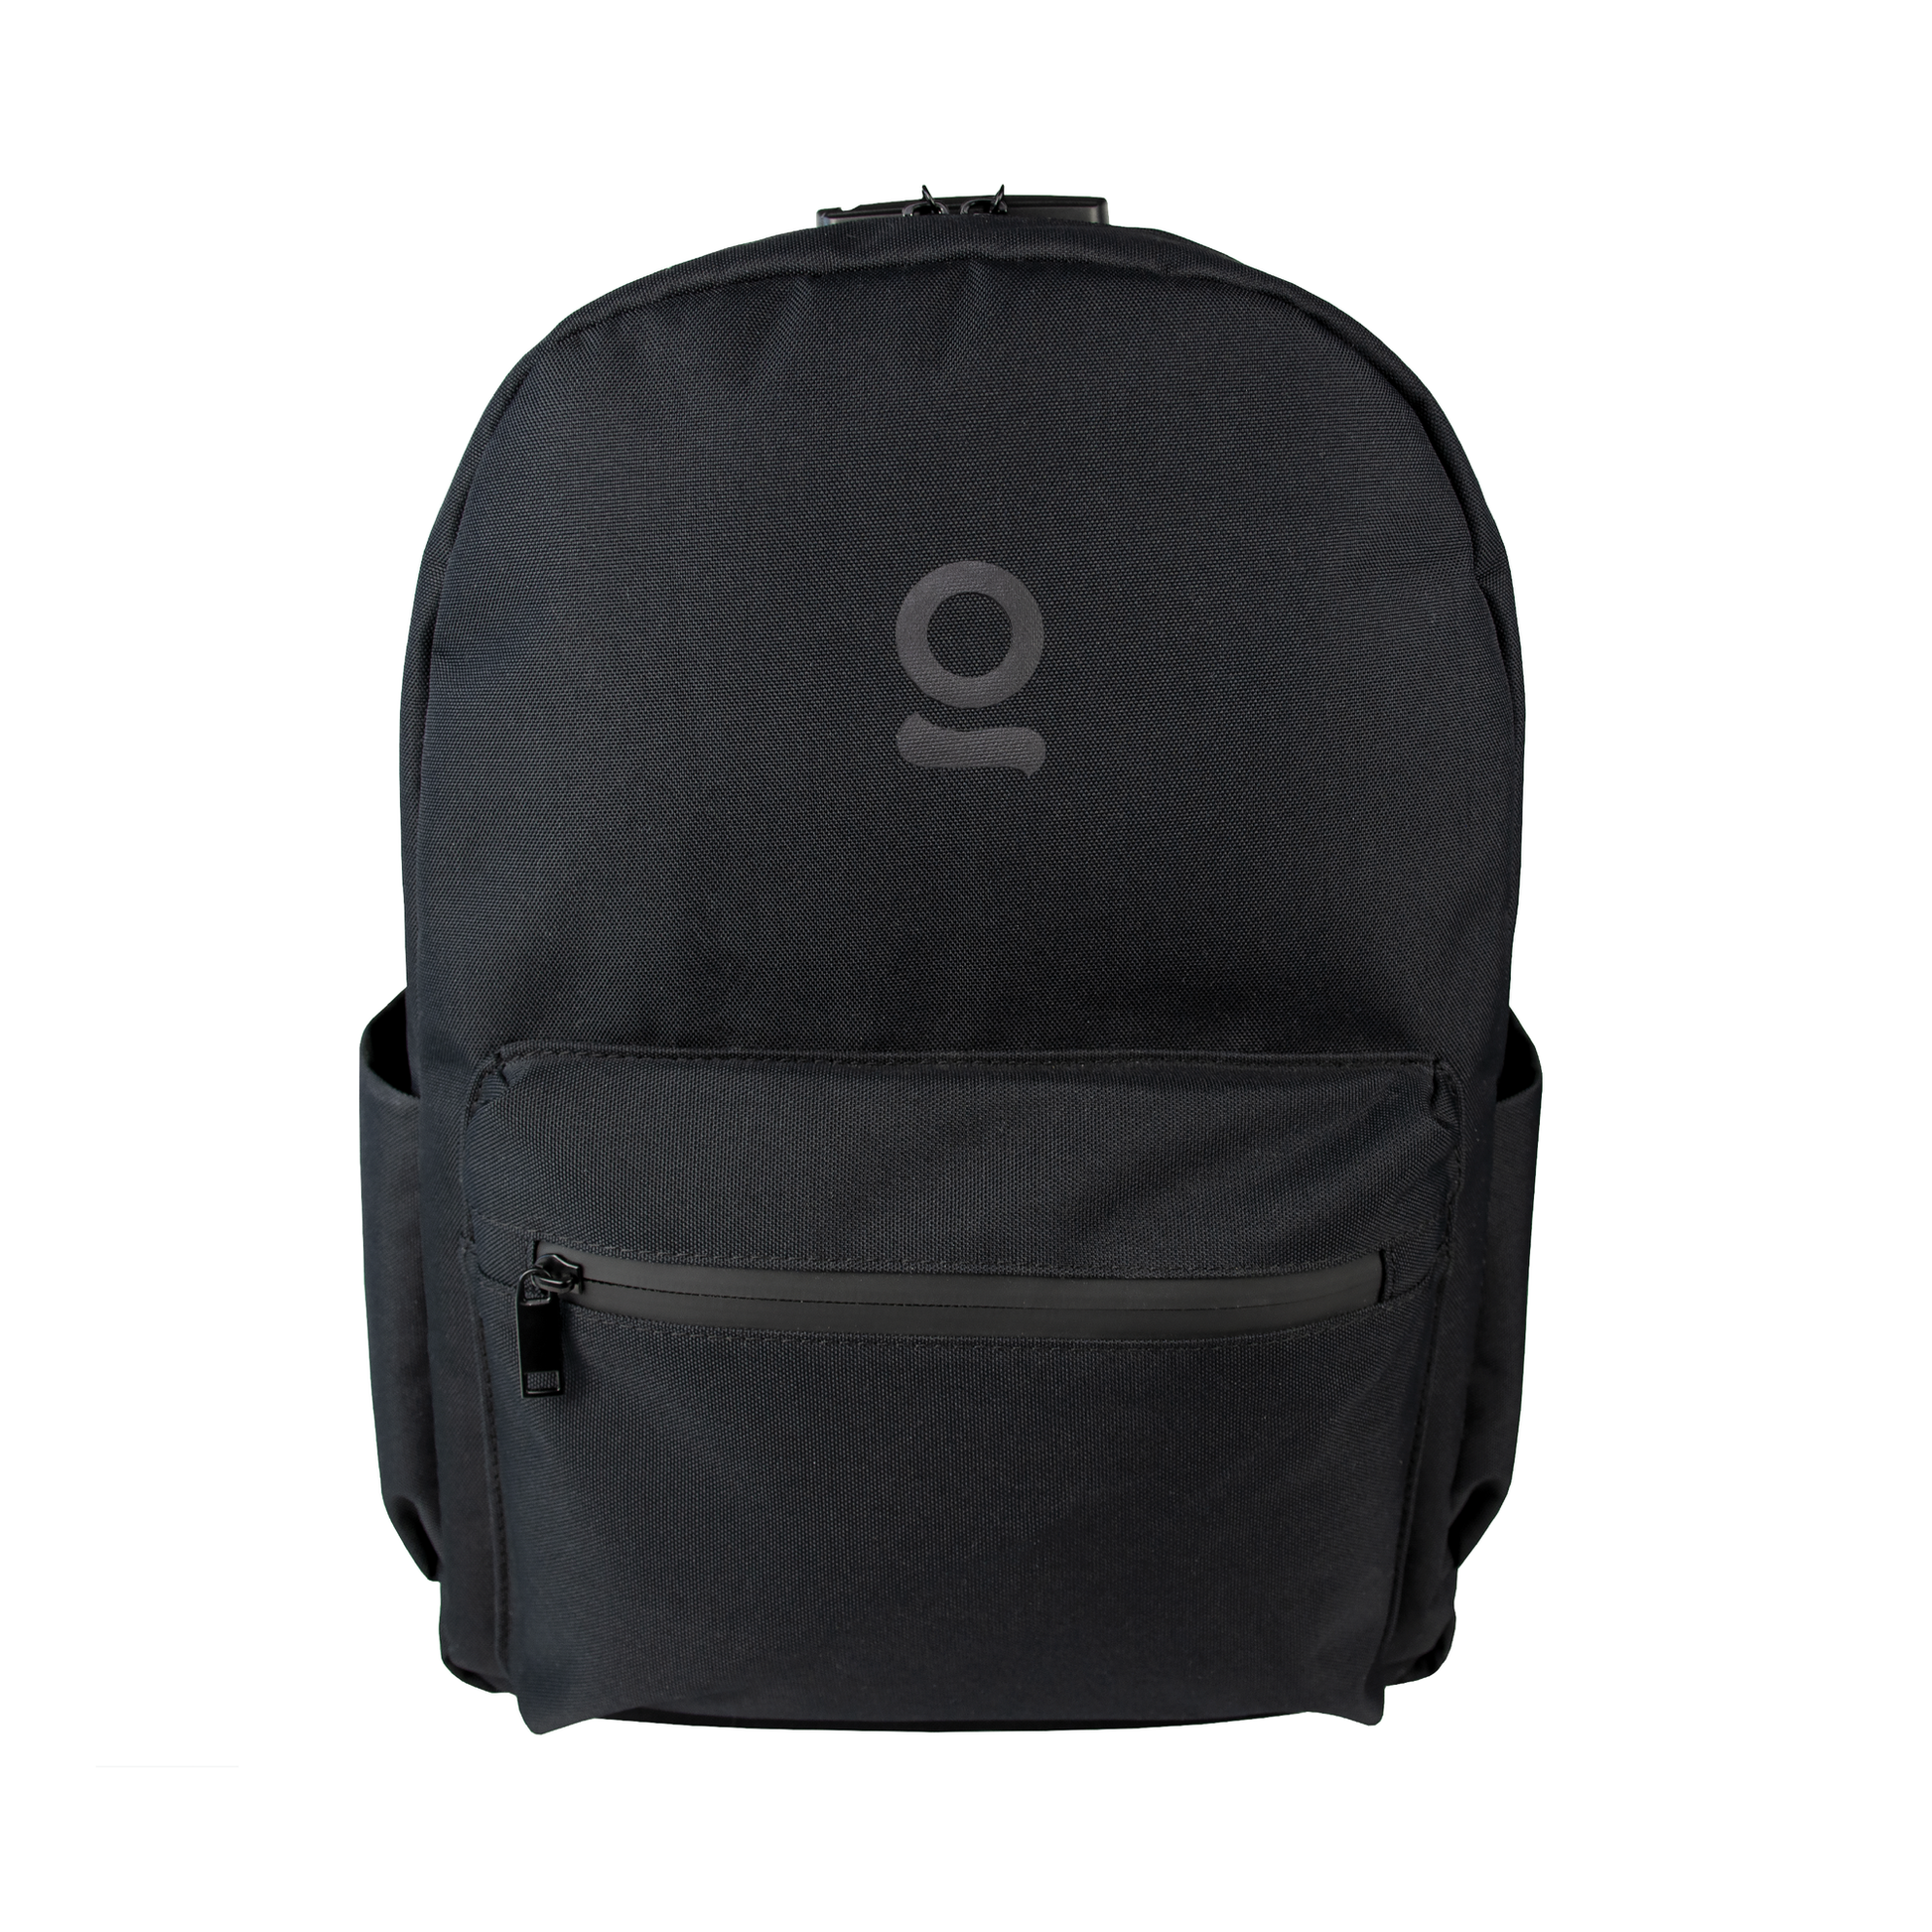 Ongrok Carbon-Lined Backpack by Ongrok | Mission Dispensary